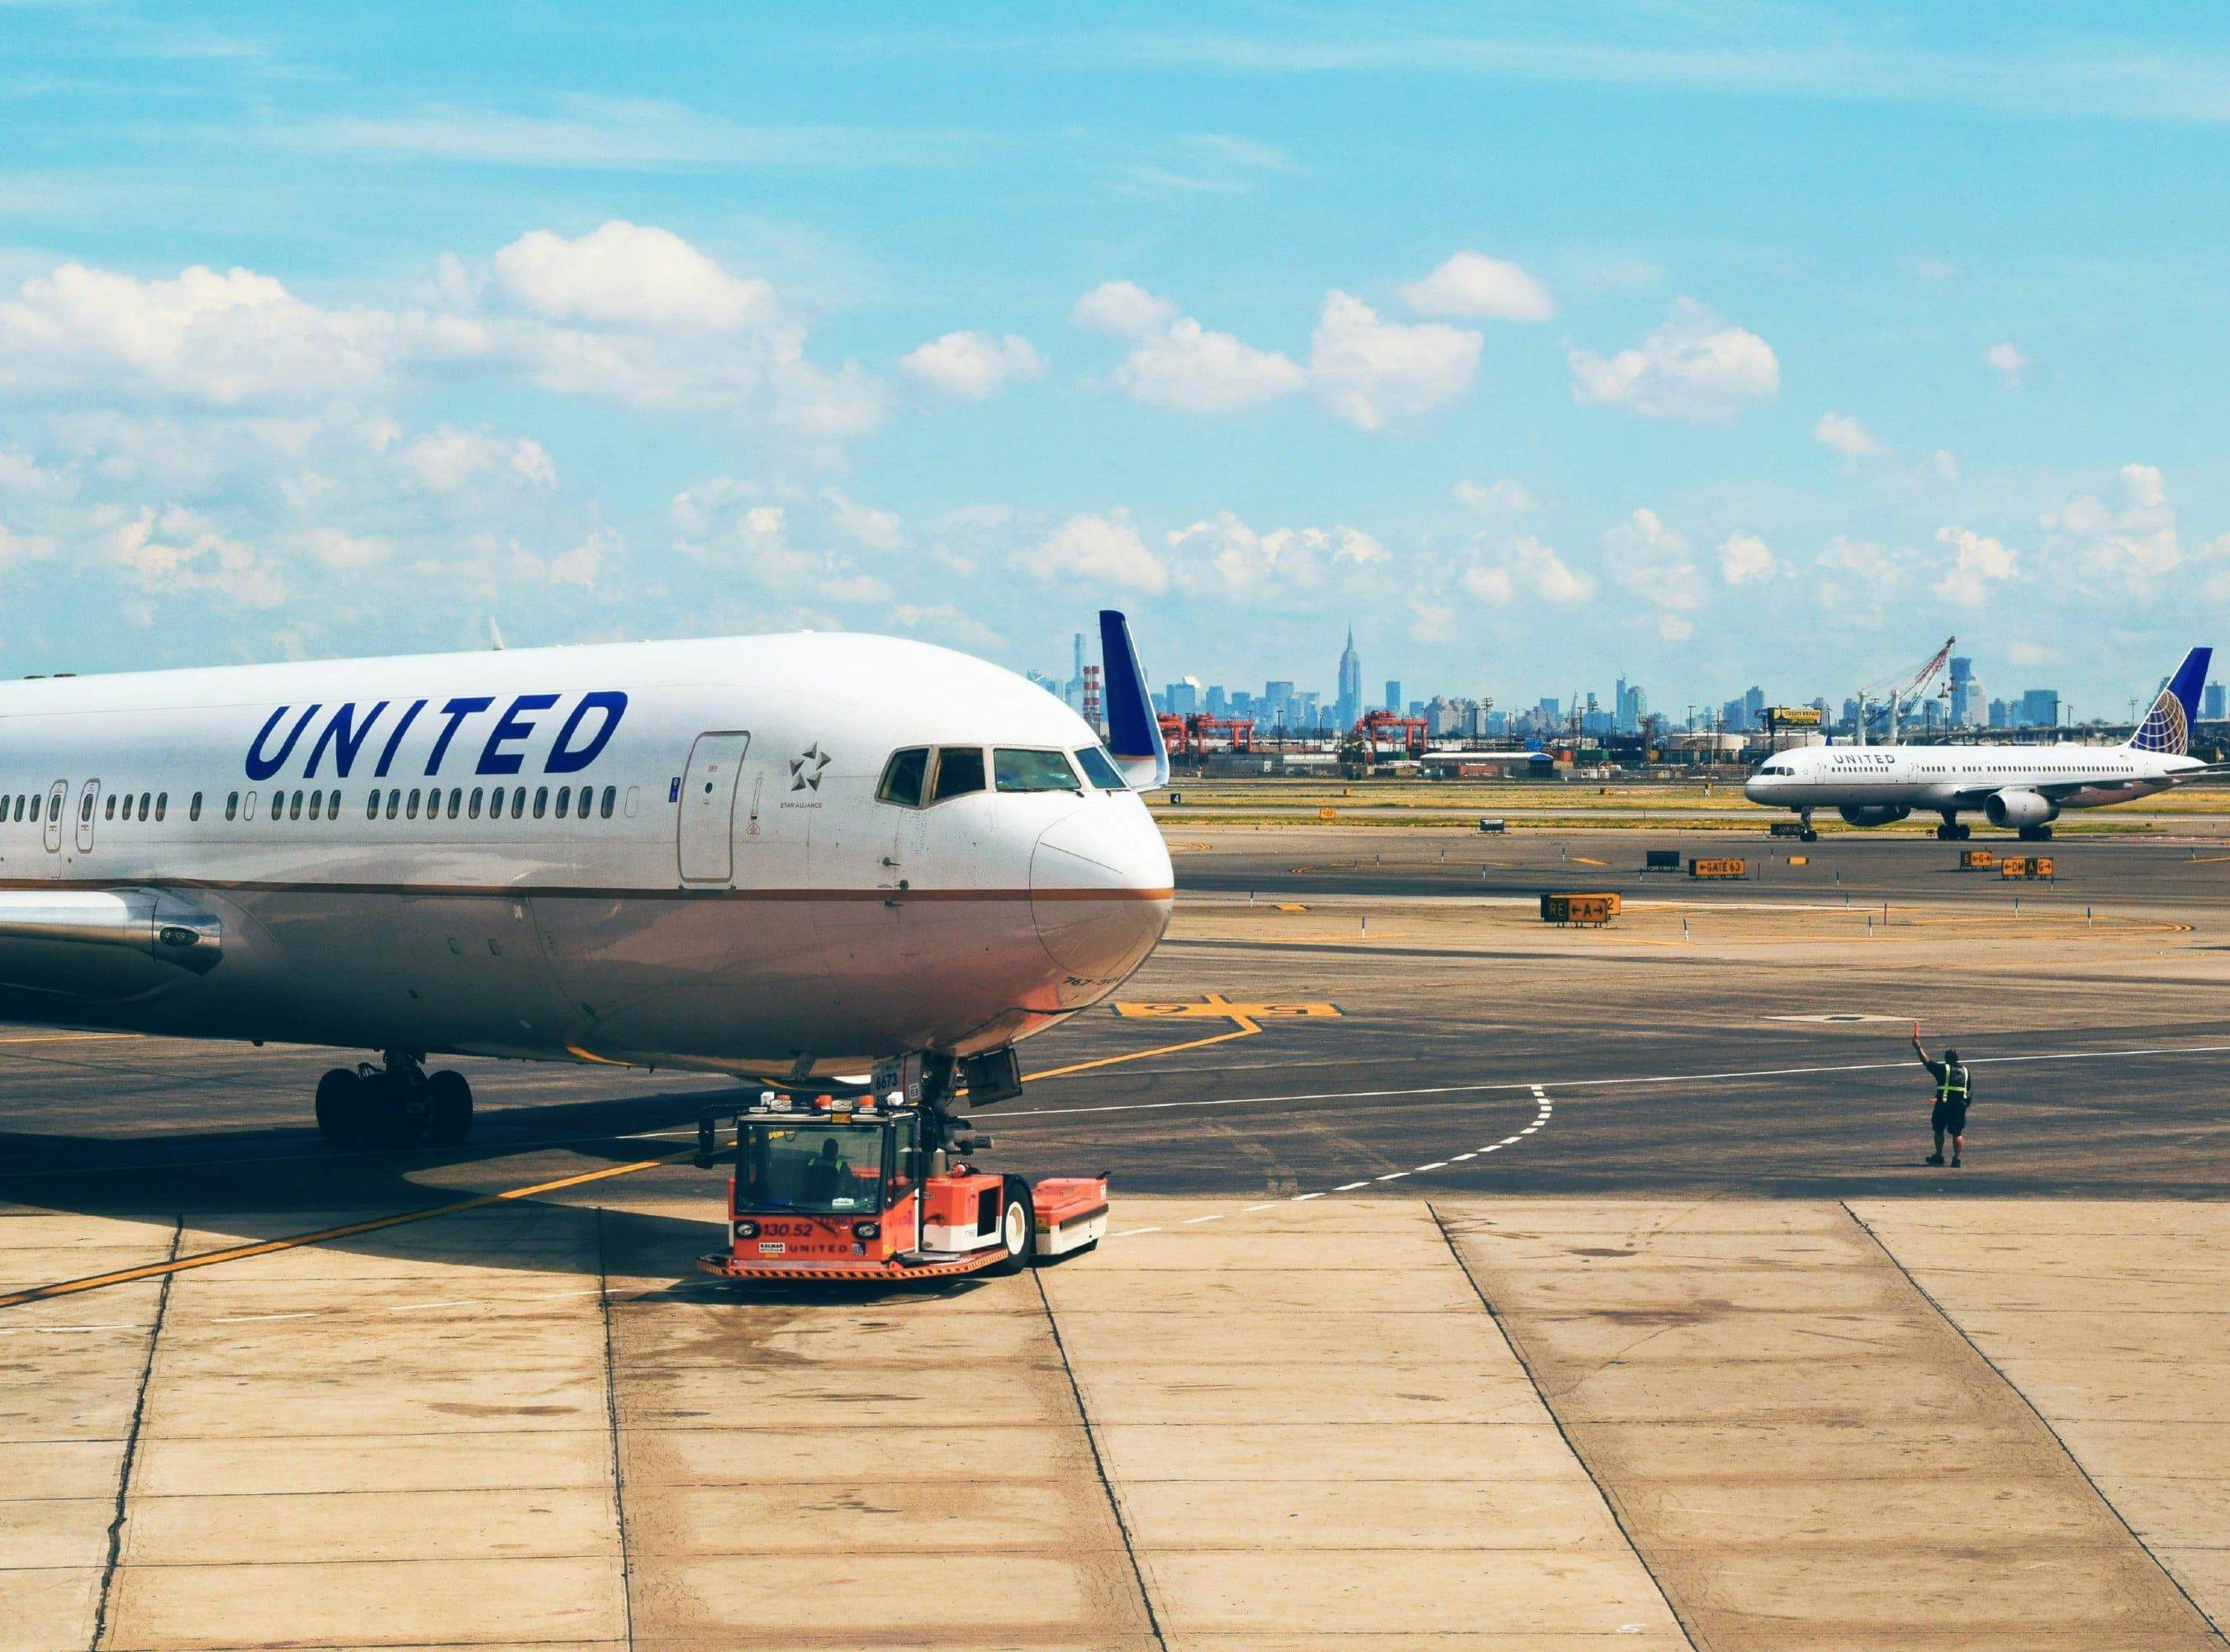 Customers Reject United’s Force Majeure Defense in Ticket Refund Class Action